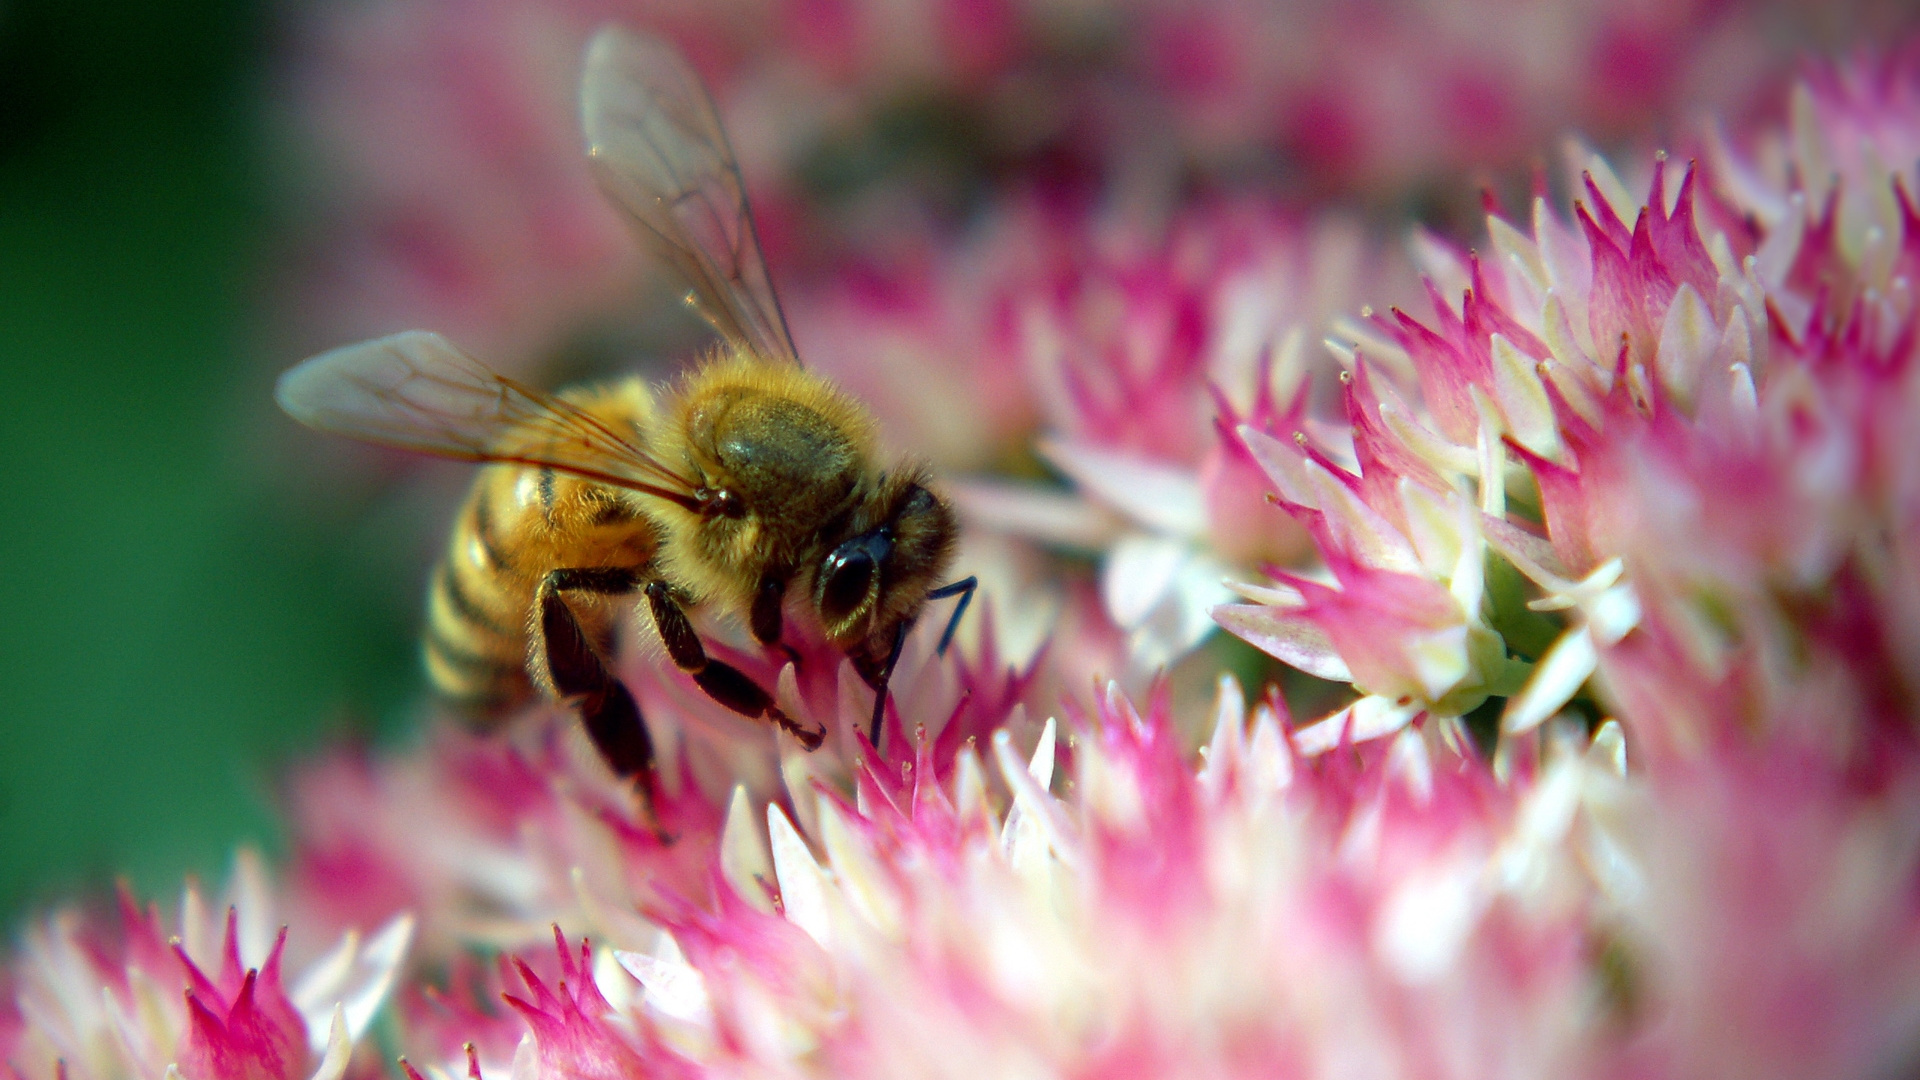 Black and Yellow Bee on Pink Flower. Wallpaper in 1920x1080 Resolution